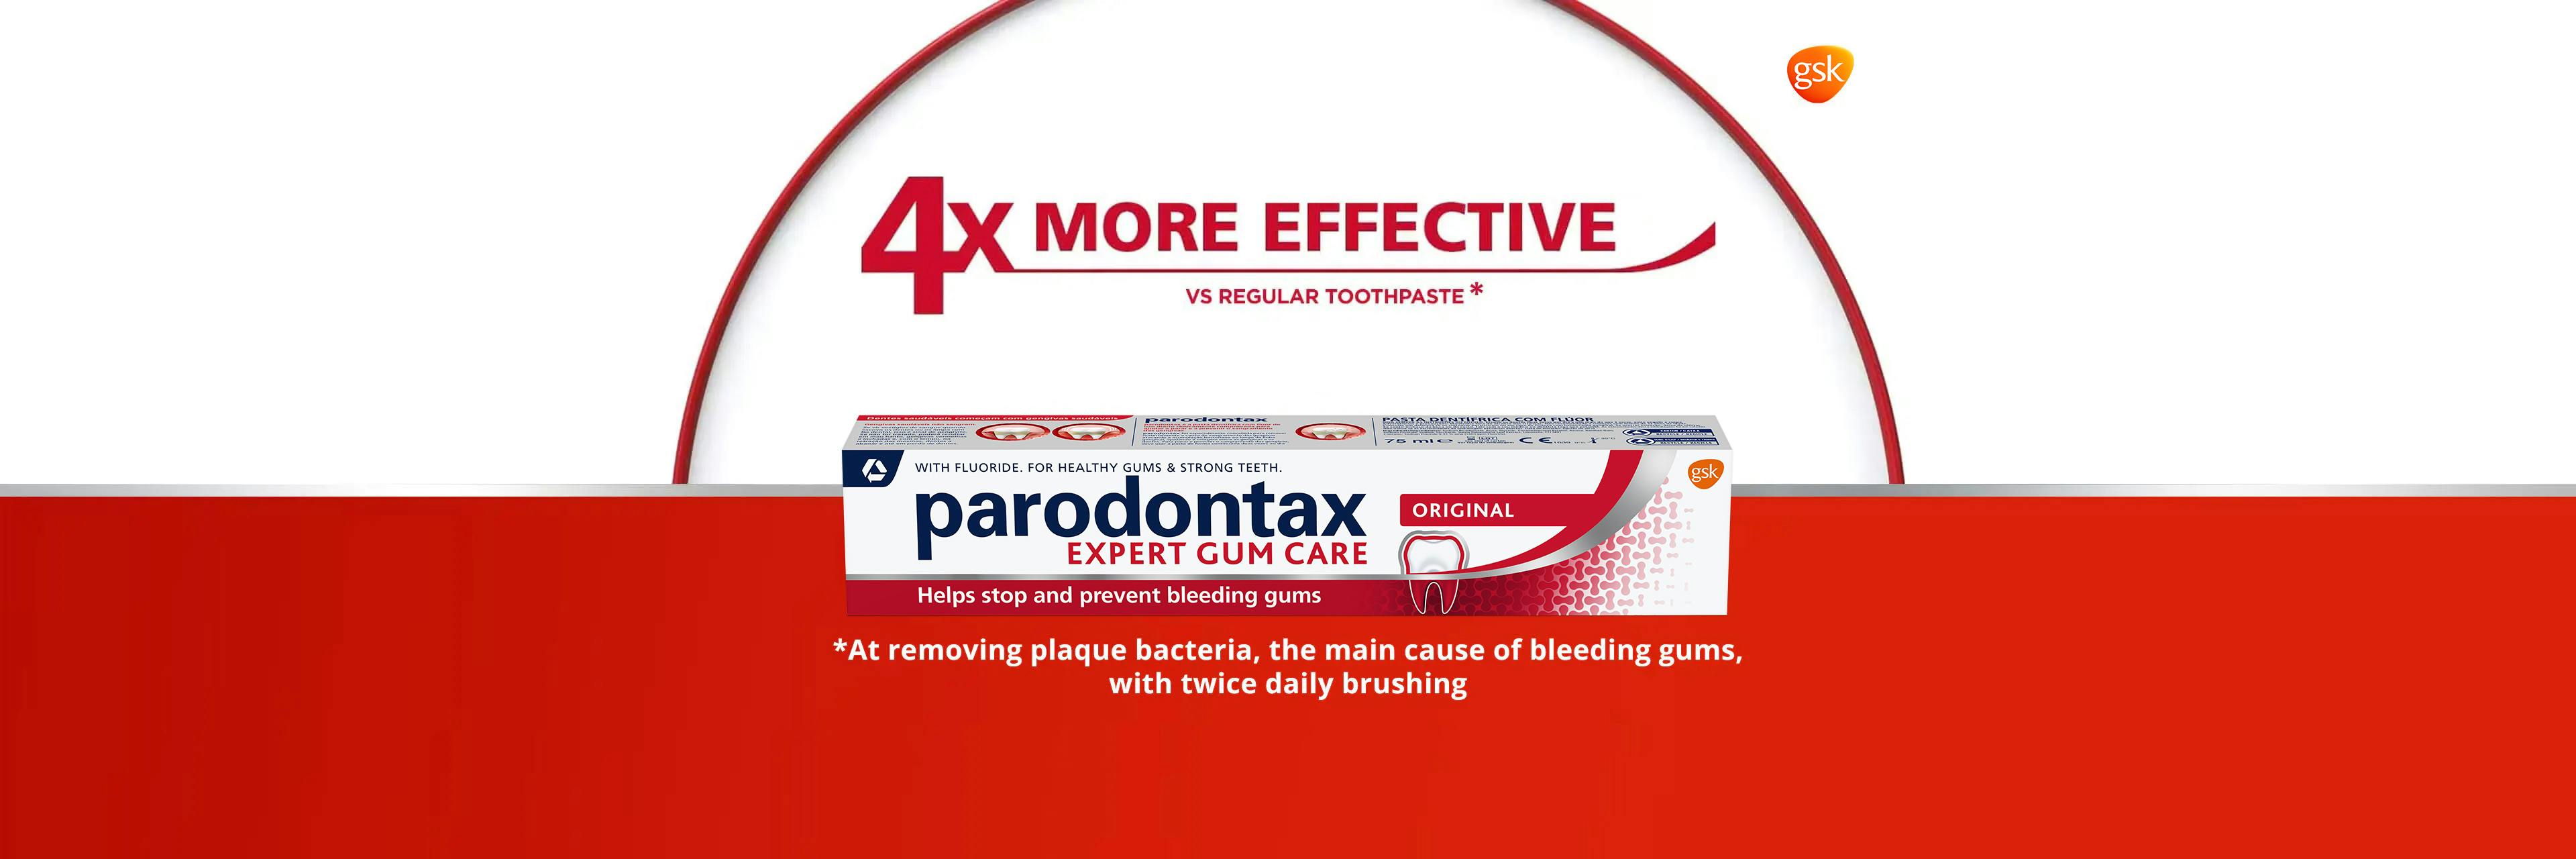 4x More Effective* Vs regular toothpaste, *at removing plaque bacteria, the main cause of bleeding gums